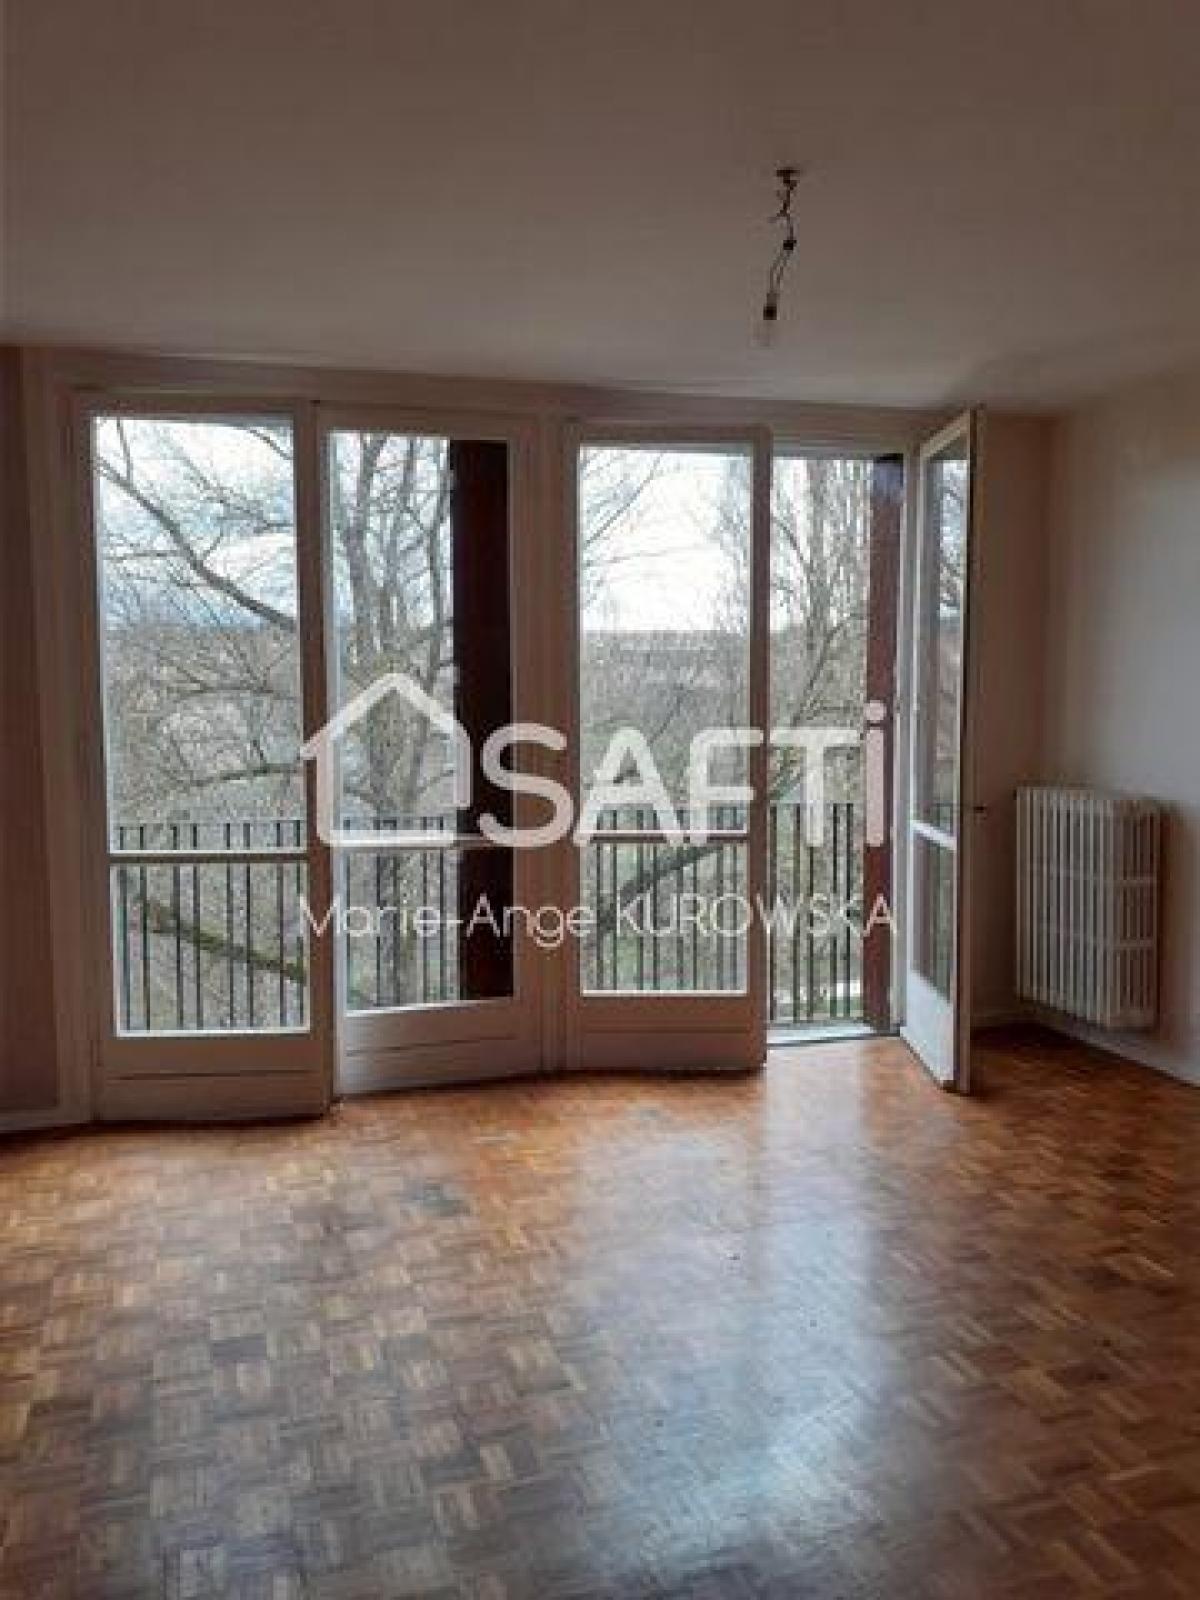 Picture of Apartment For Sale in Joeuf, Lorraine, France